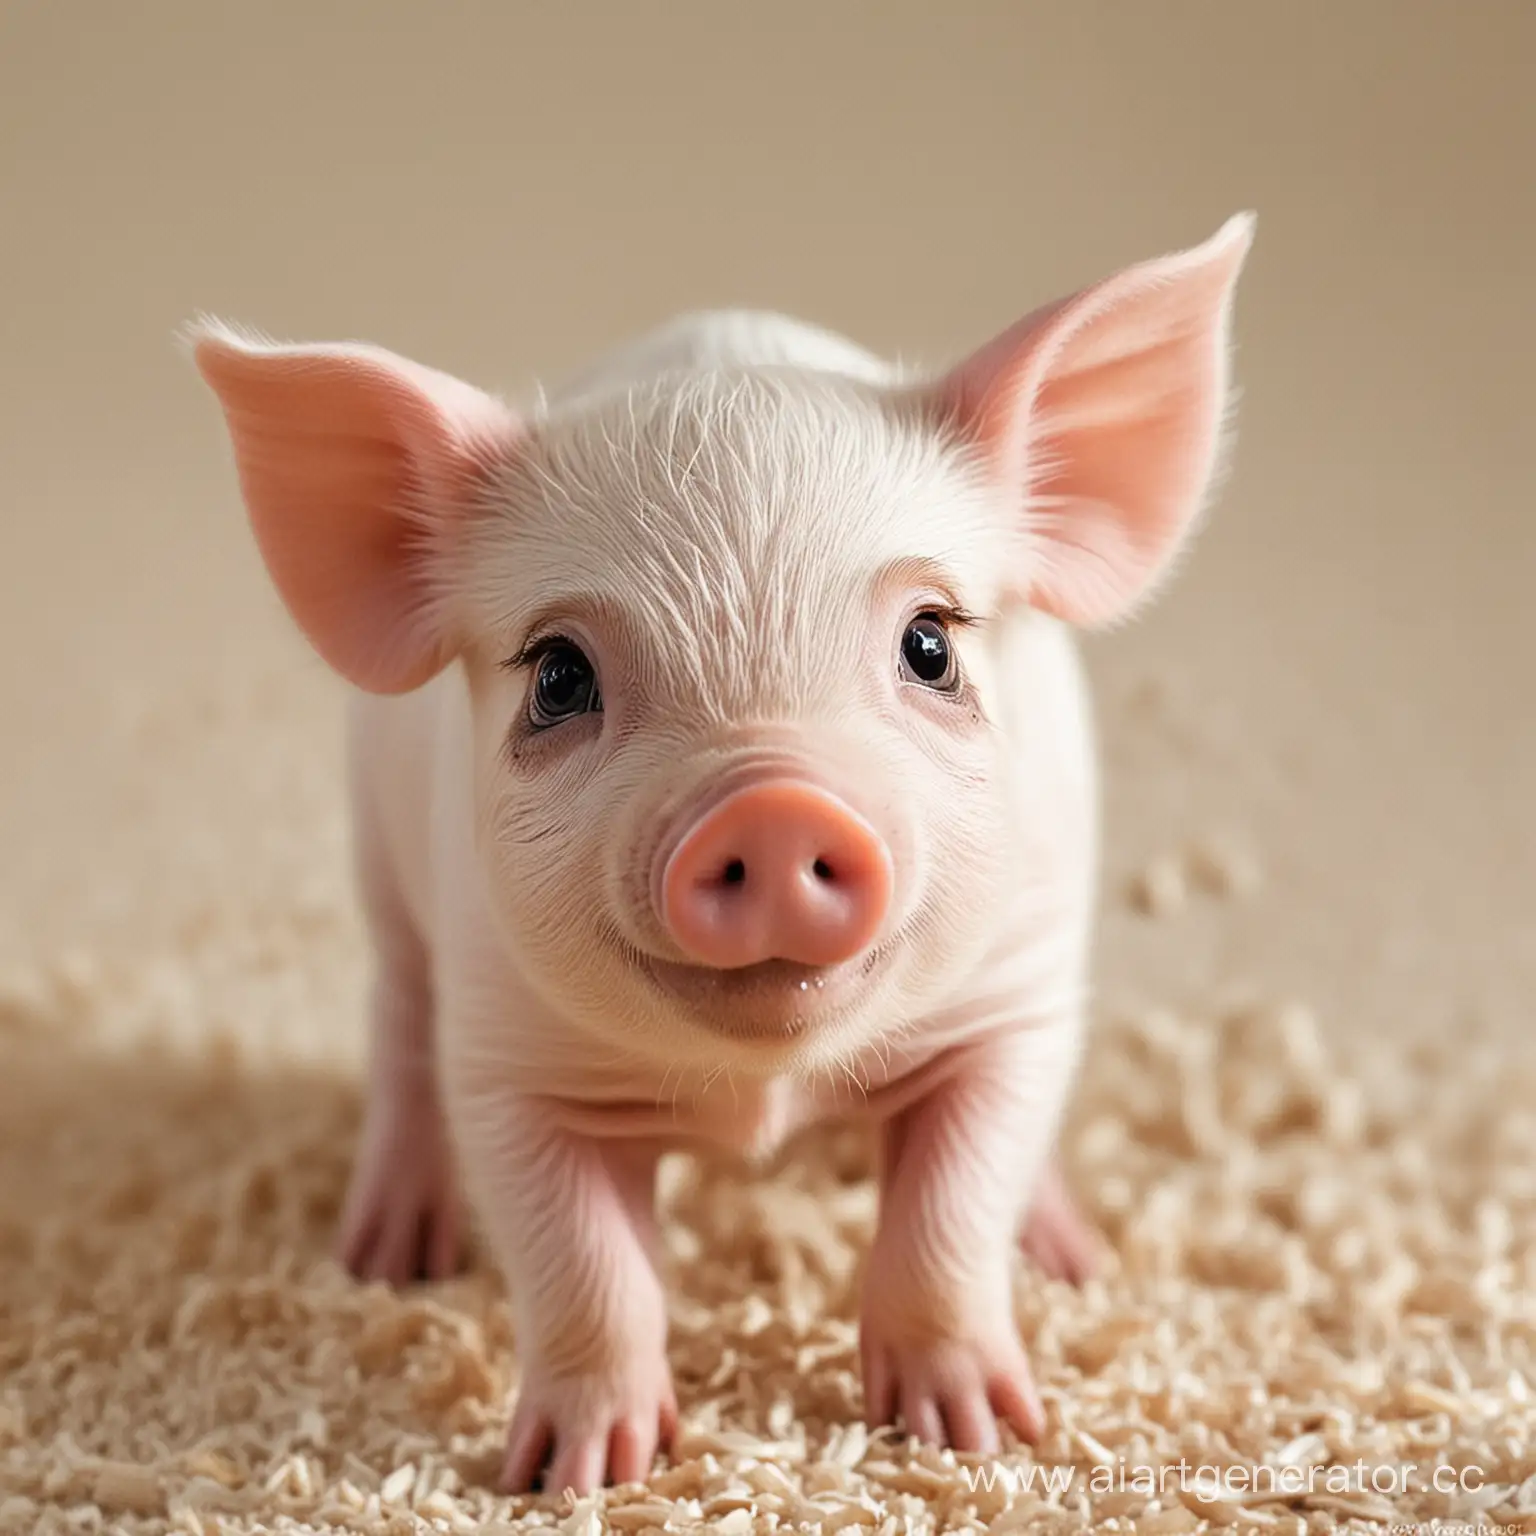 Adorable-Piggy-with-Innocent-Expression